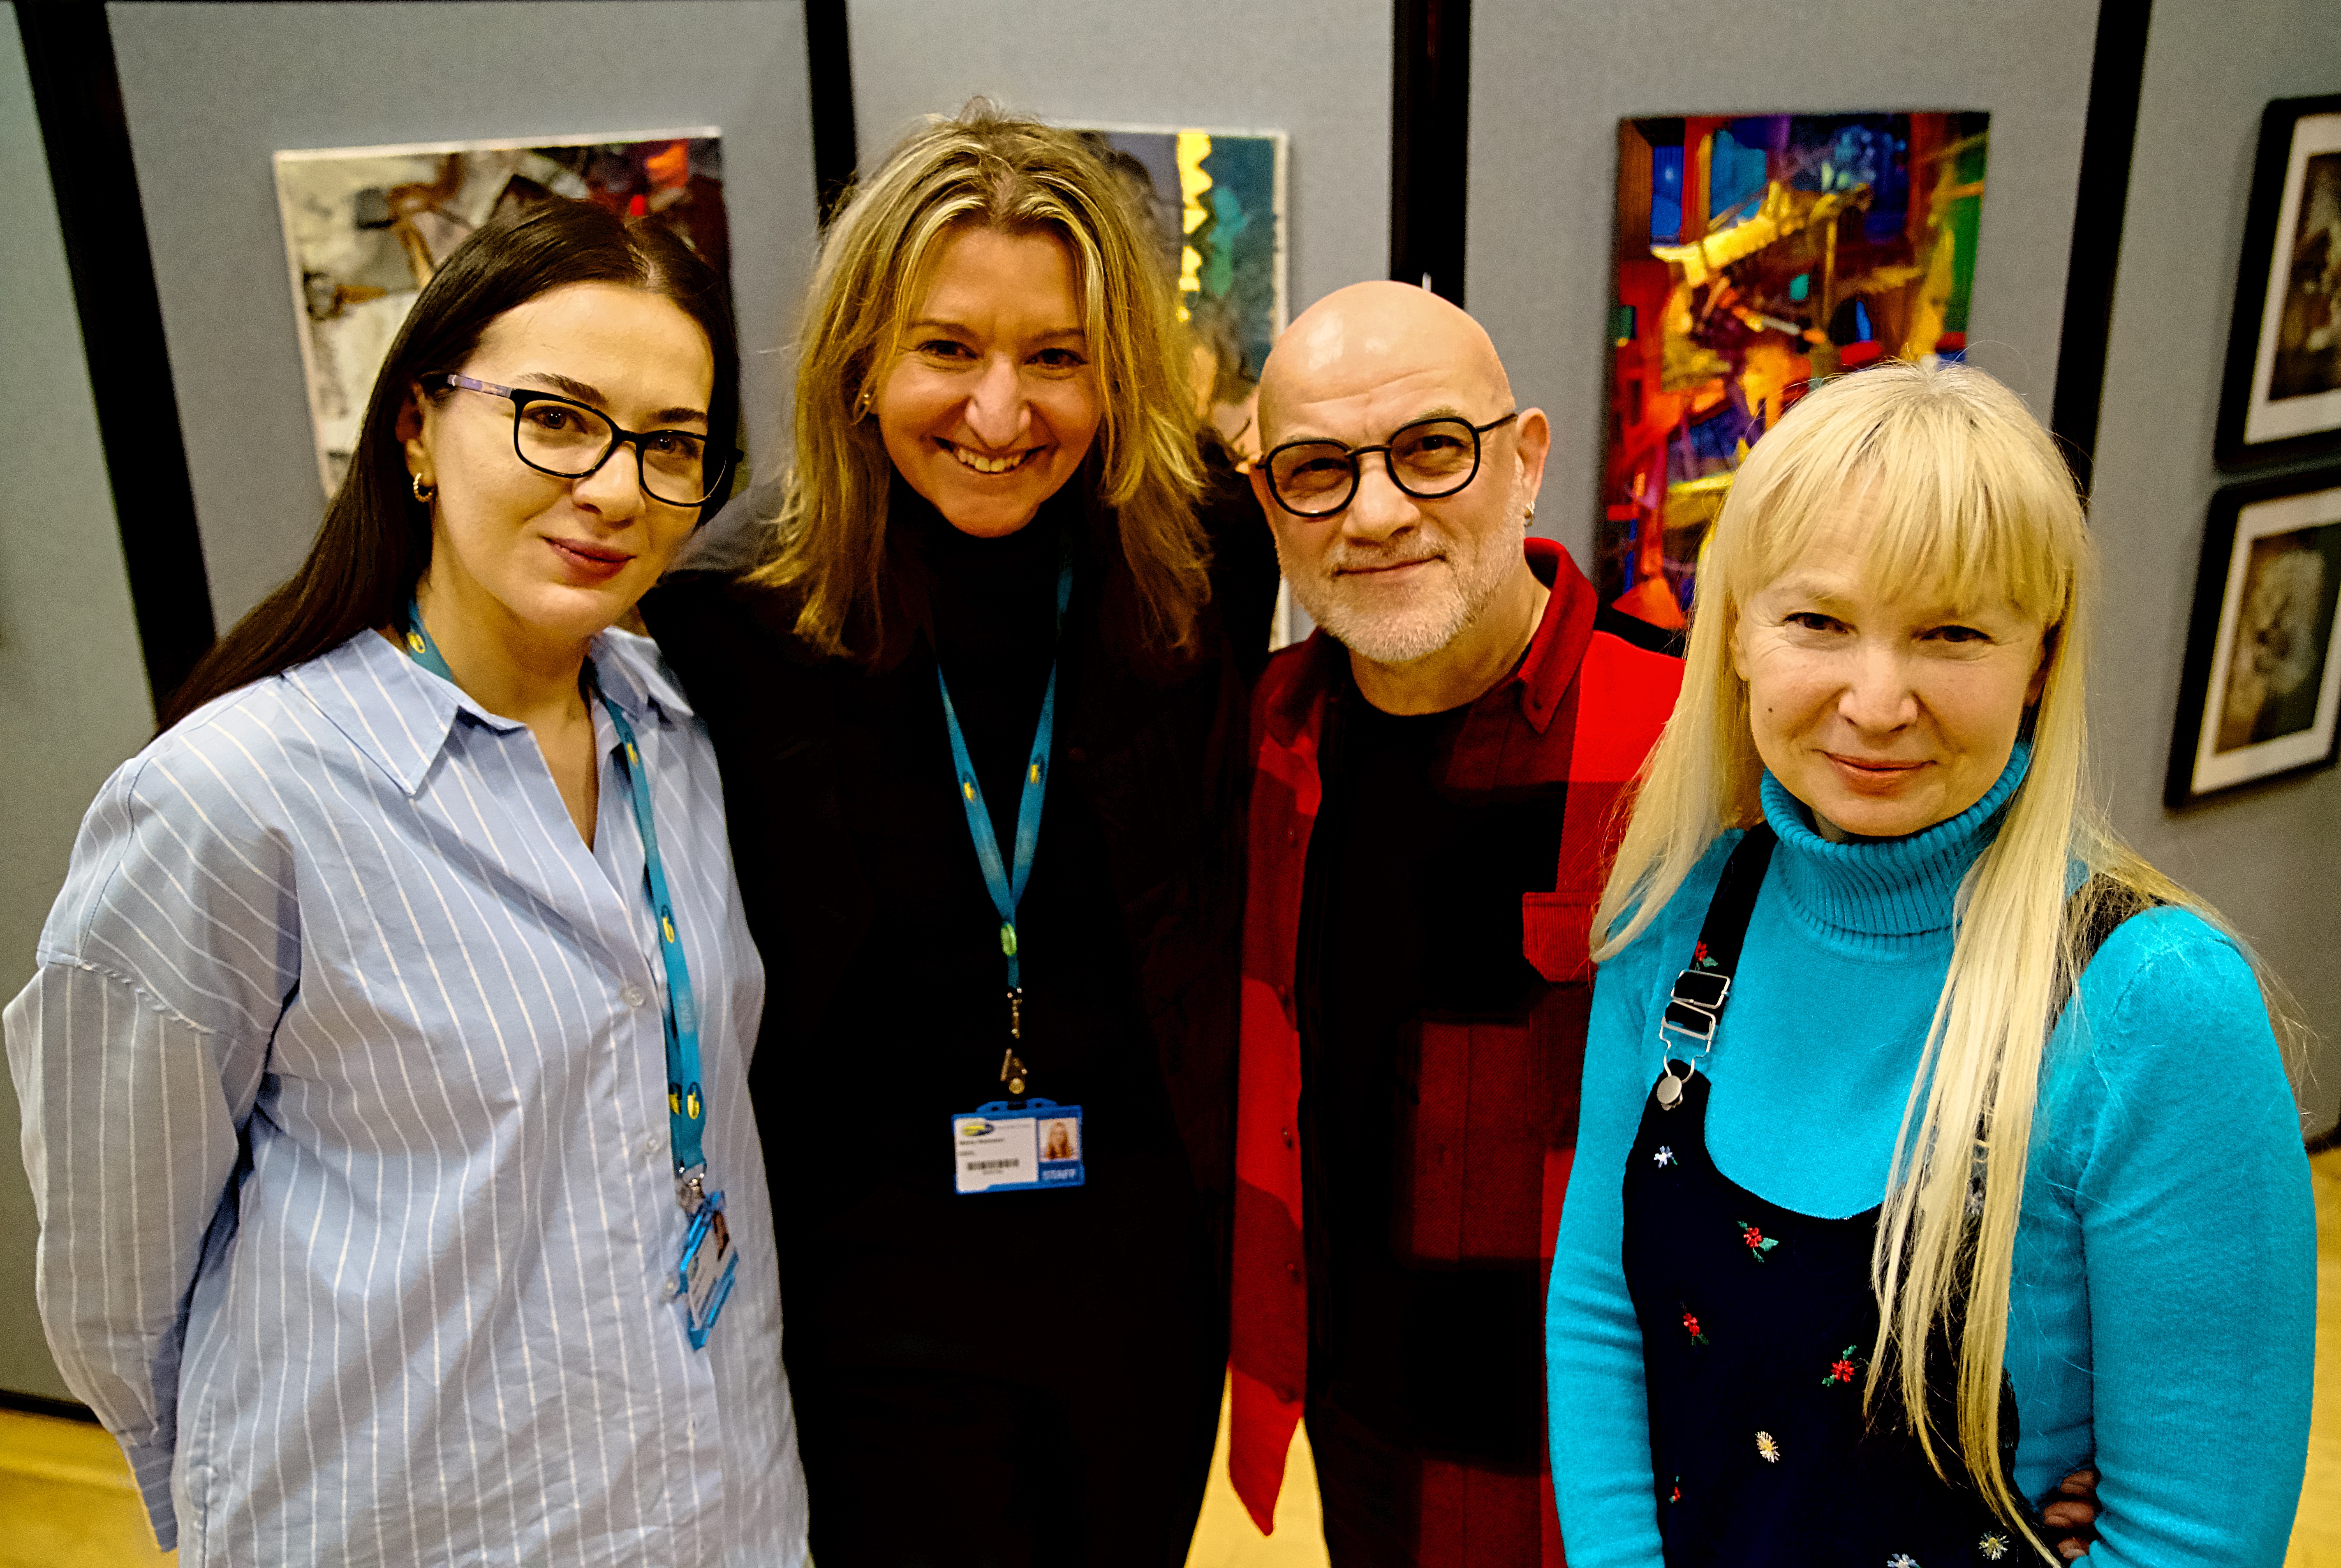 Artist Aram Muankyan poses in front of paitings with his wife and staff from Wirral Met art department.